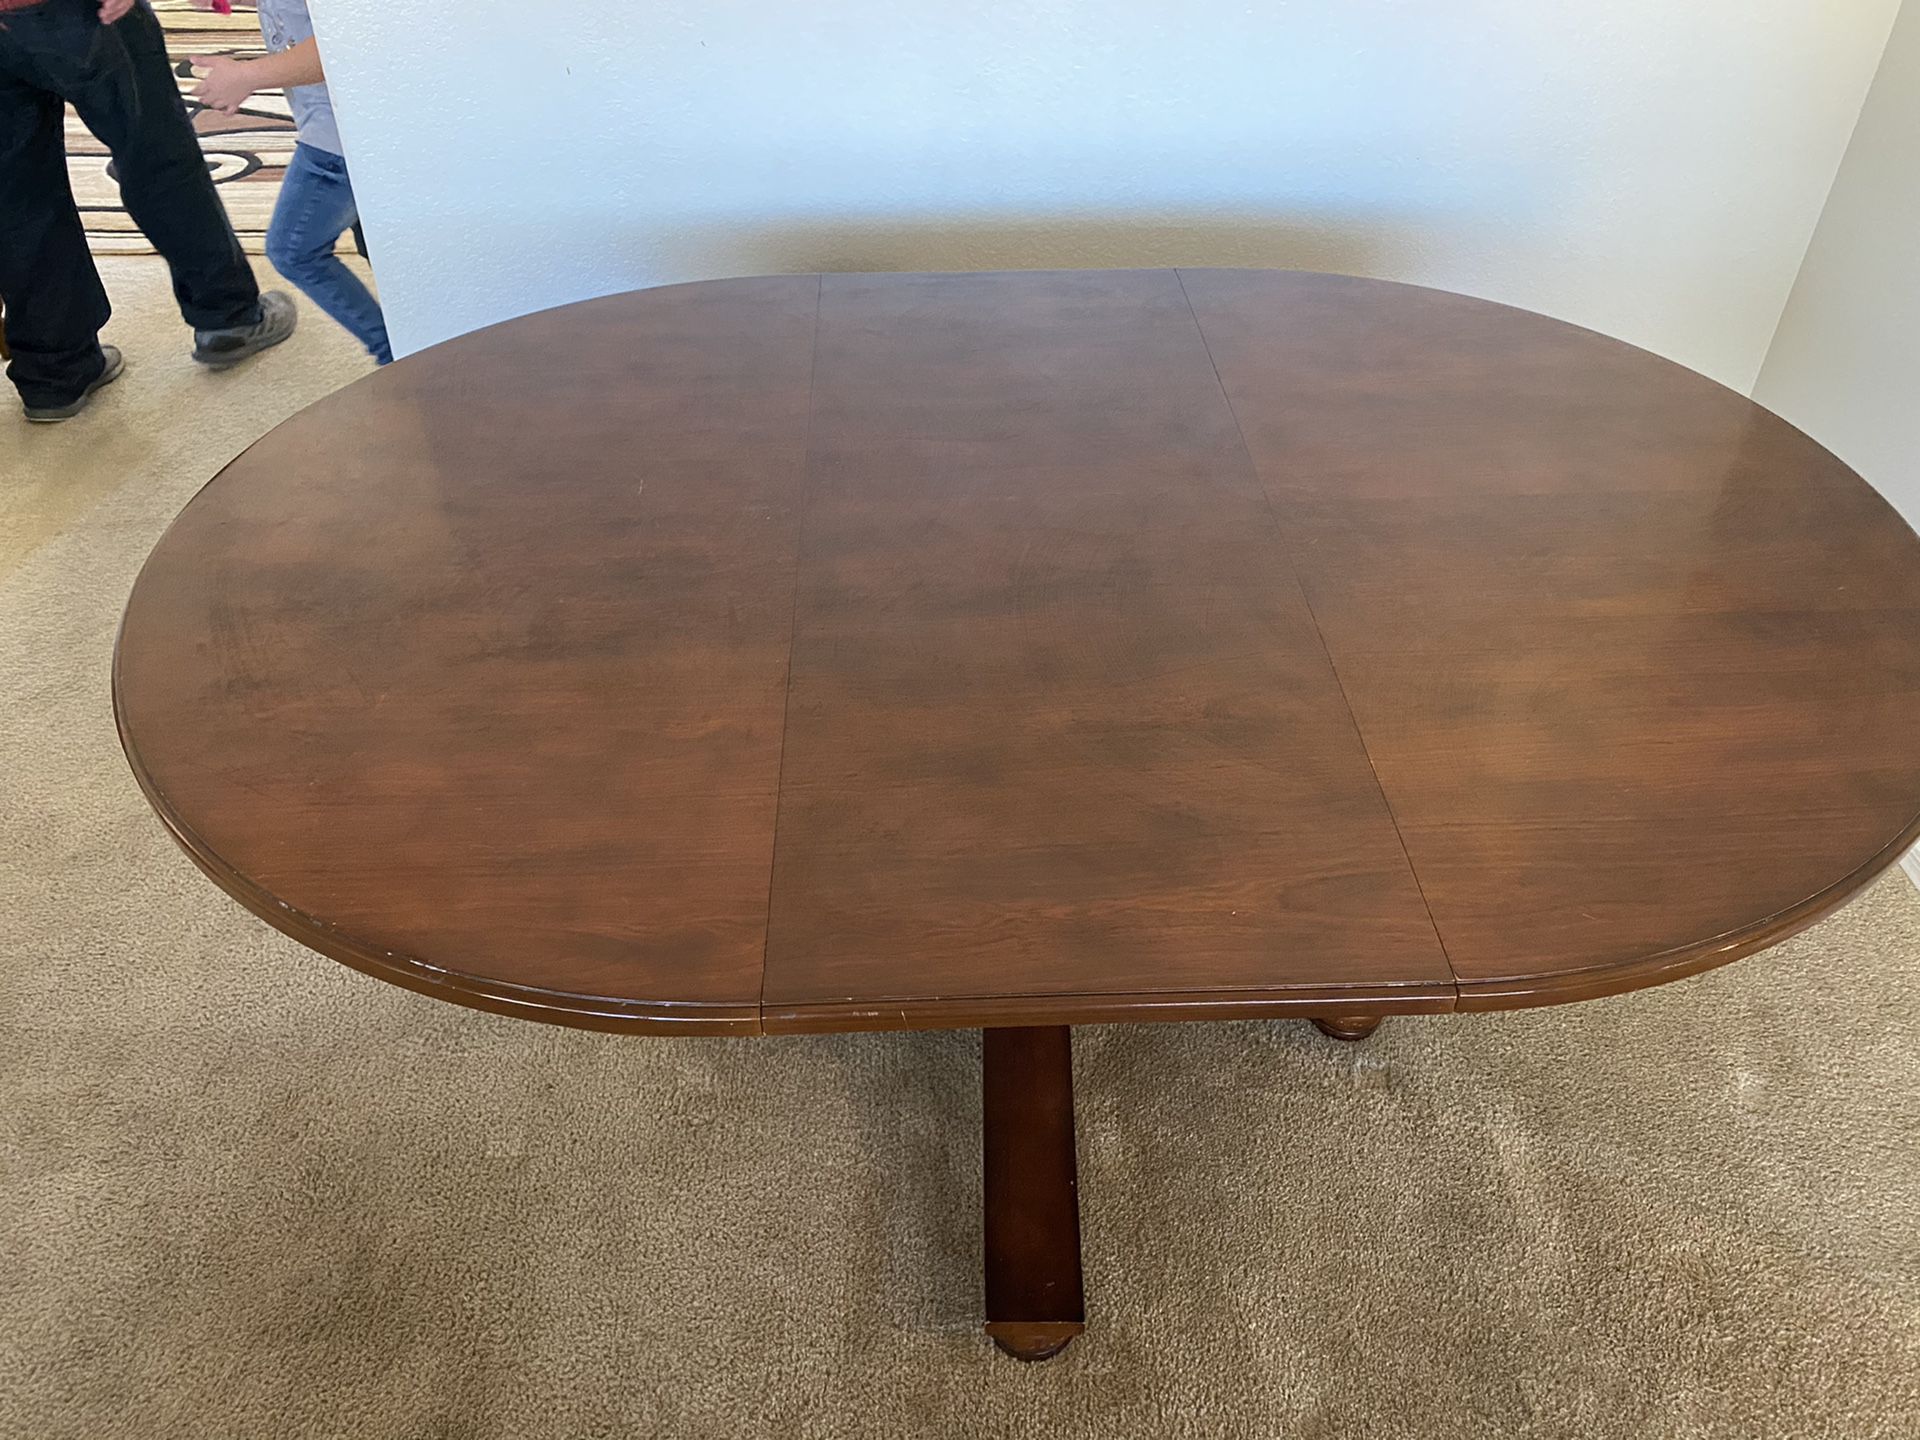 66x48 kitchen table with 4 chairs